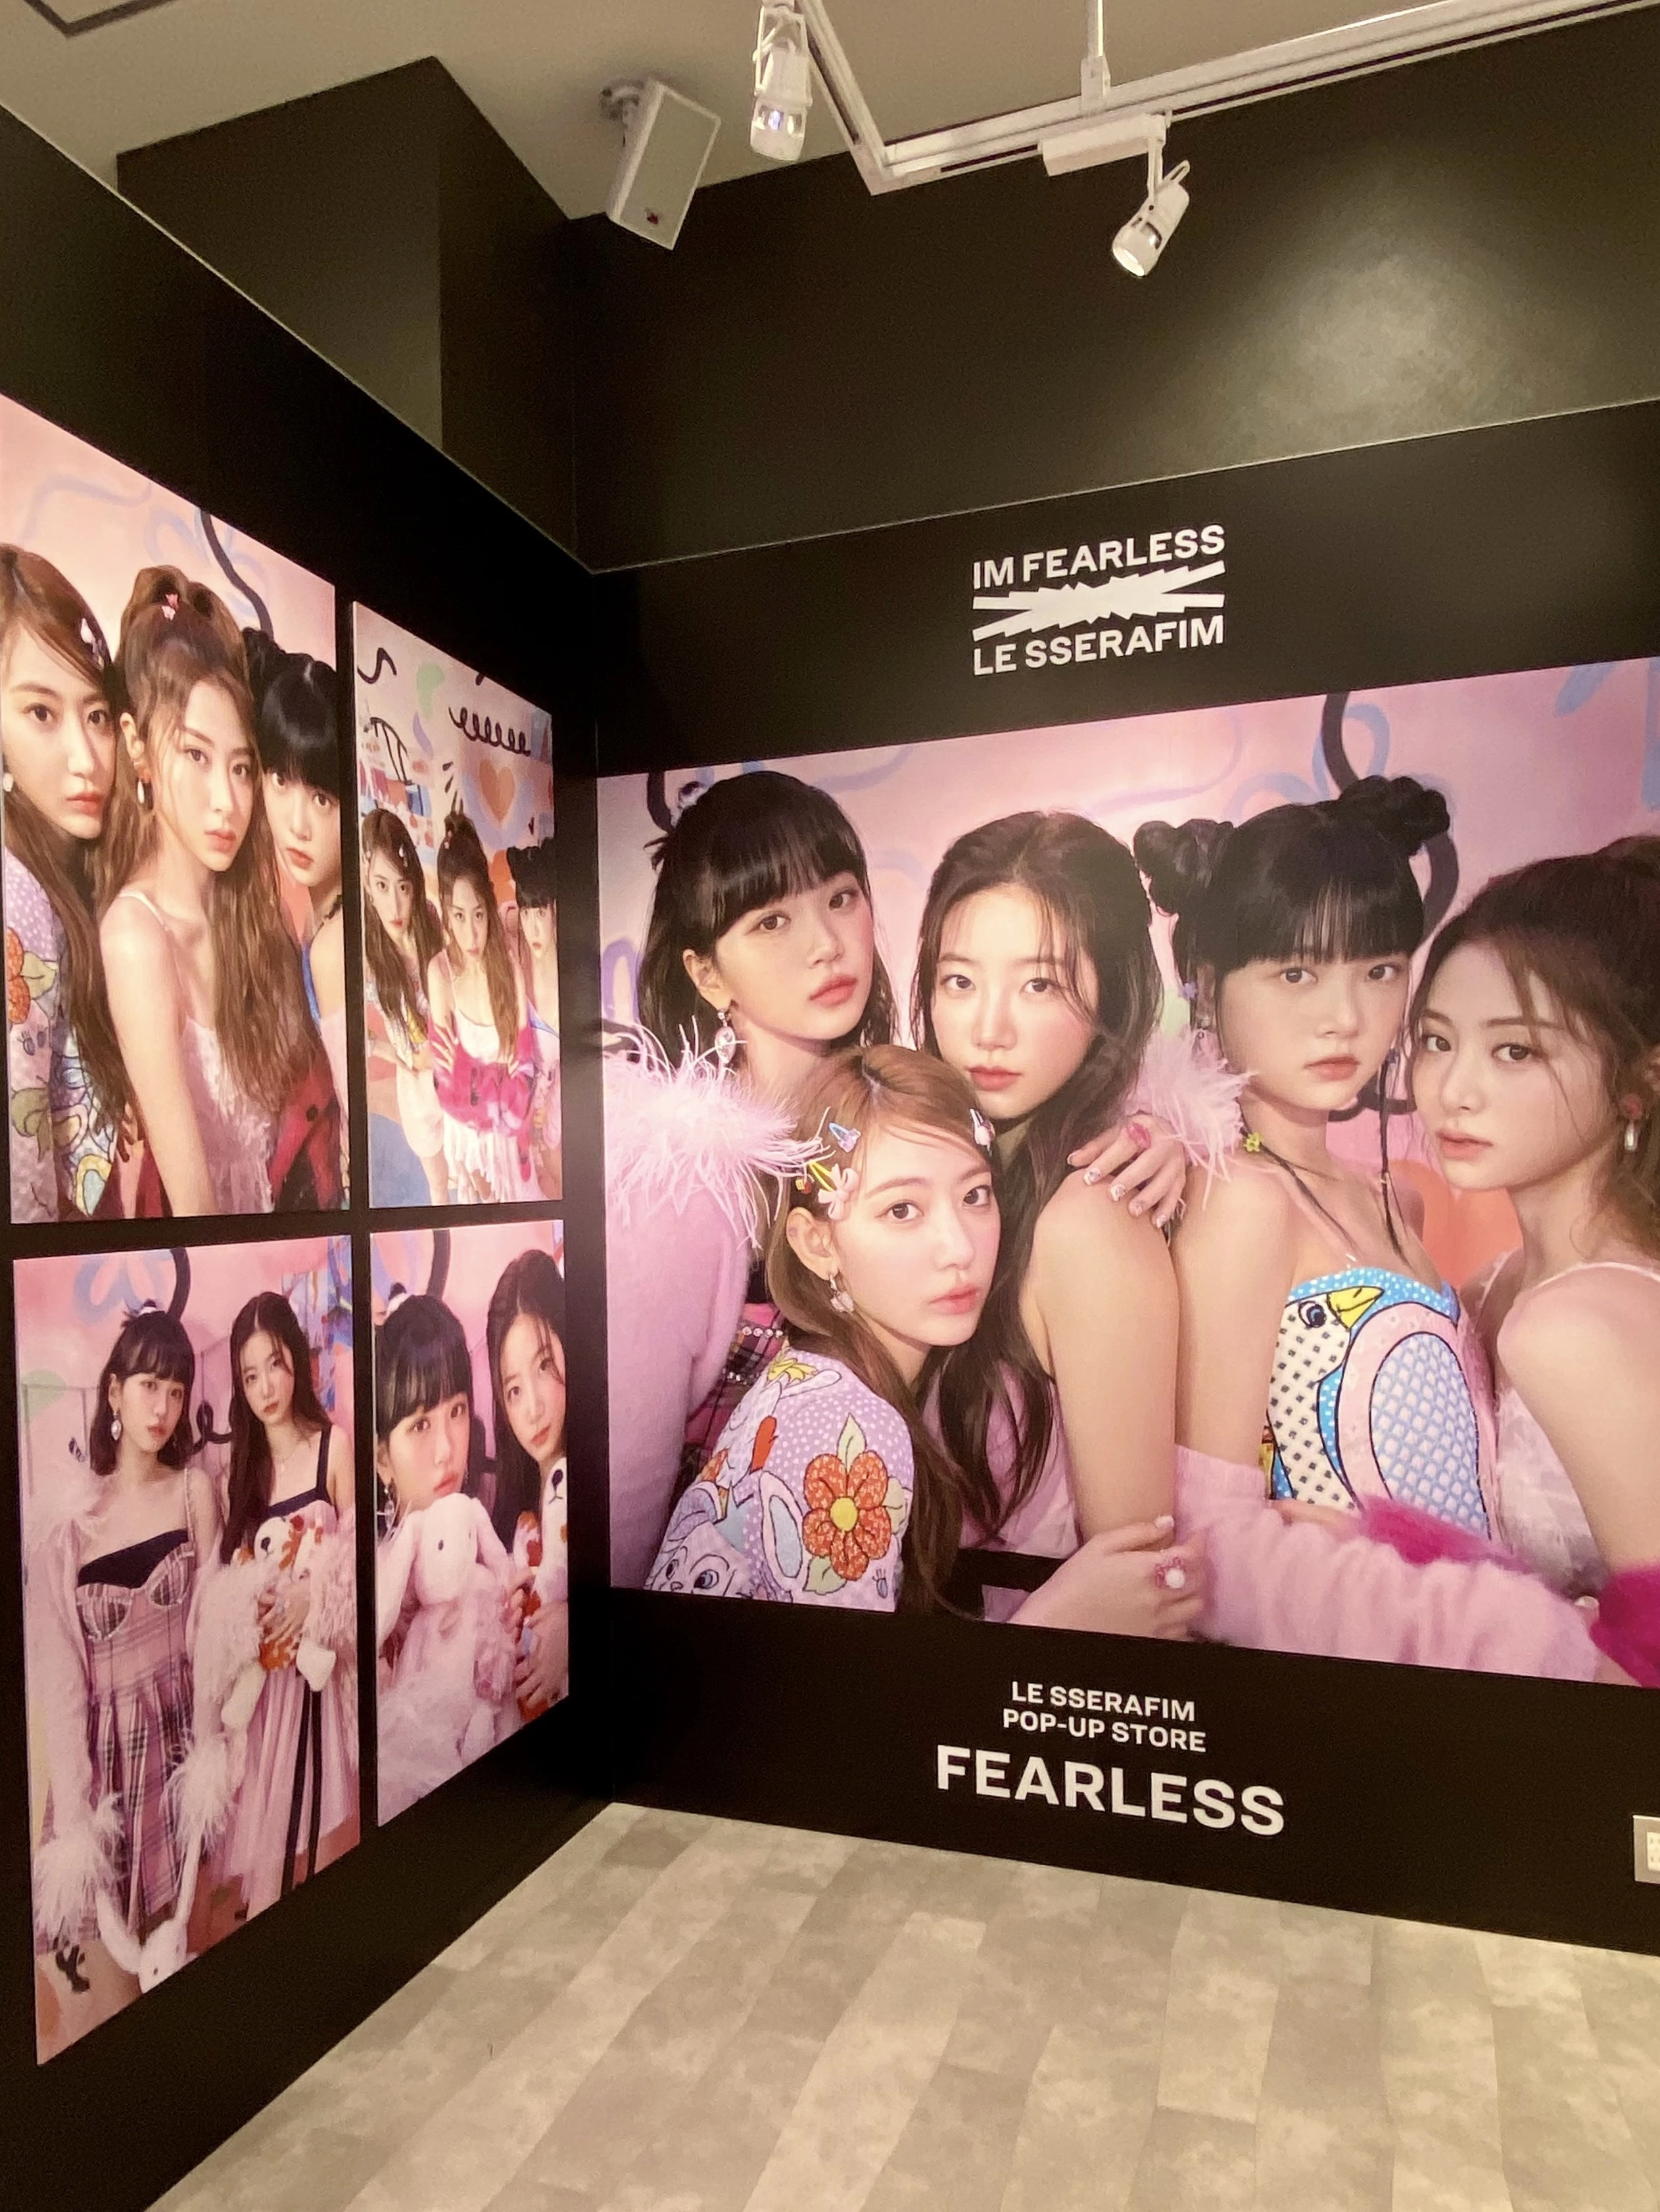 LE SSERAFIM POP-UP STORE ‘FEARLESS’　店内　撮影スポット　推し活　ルセラフィム 